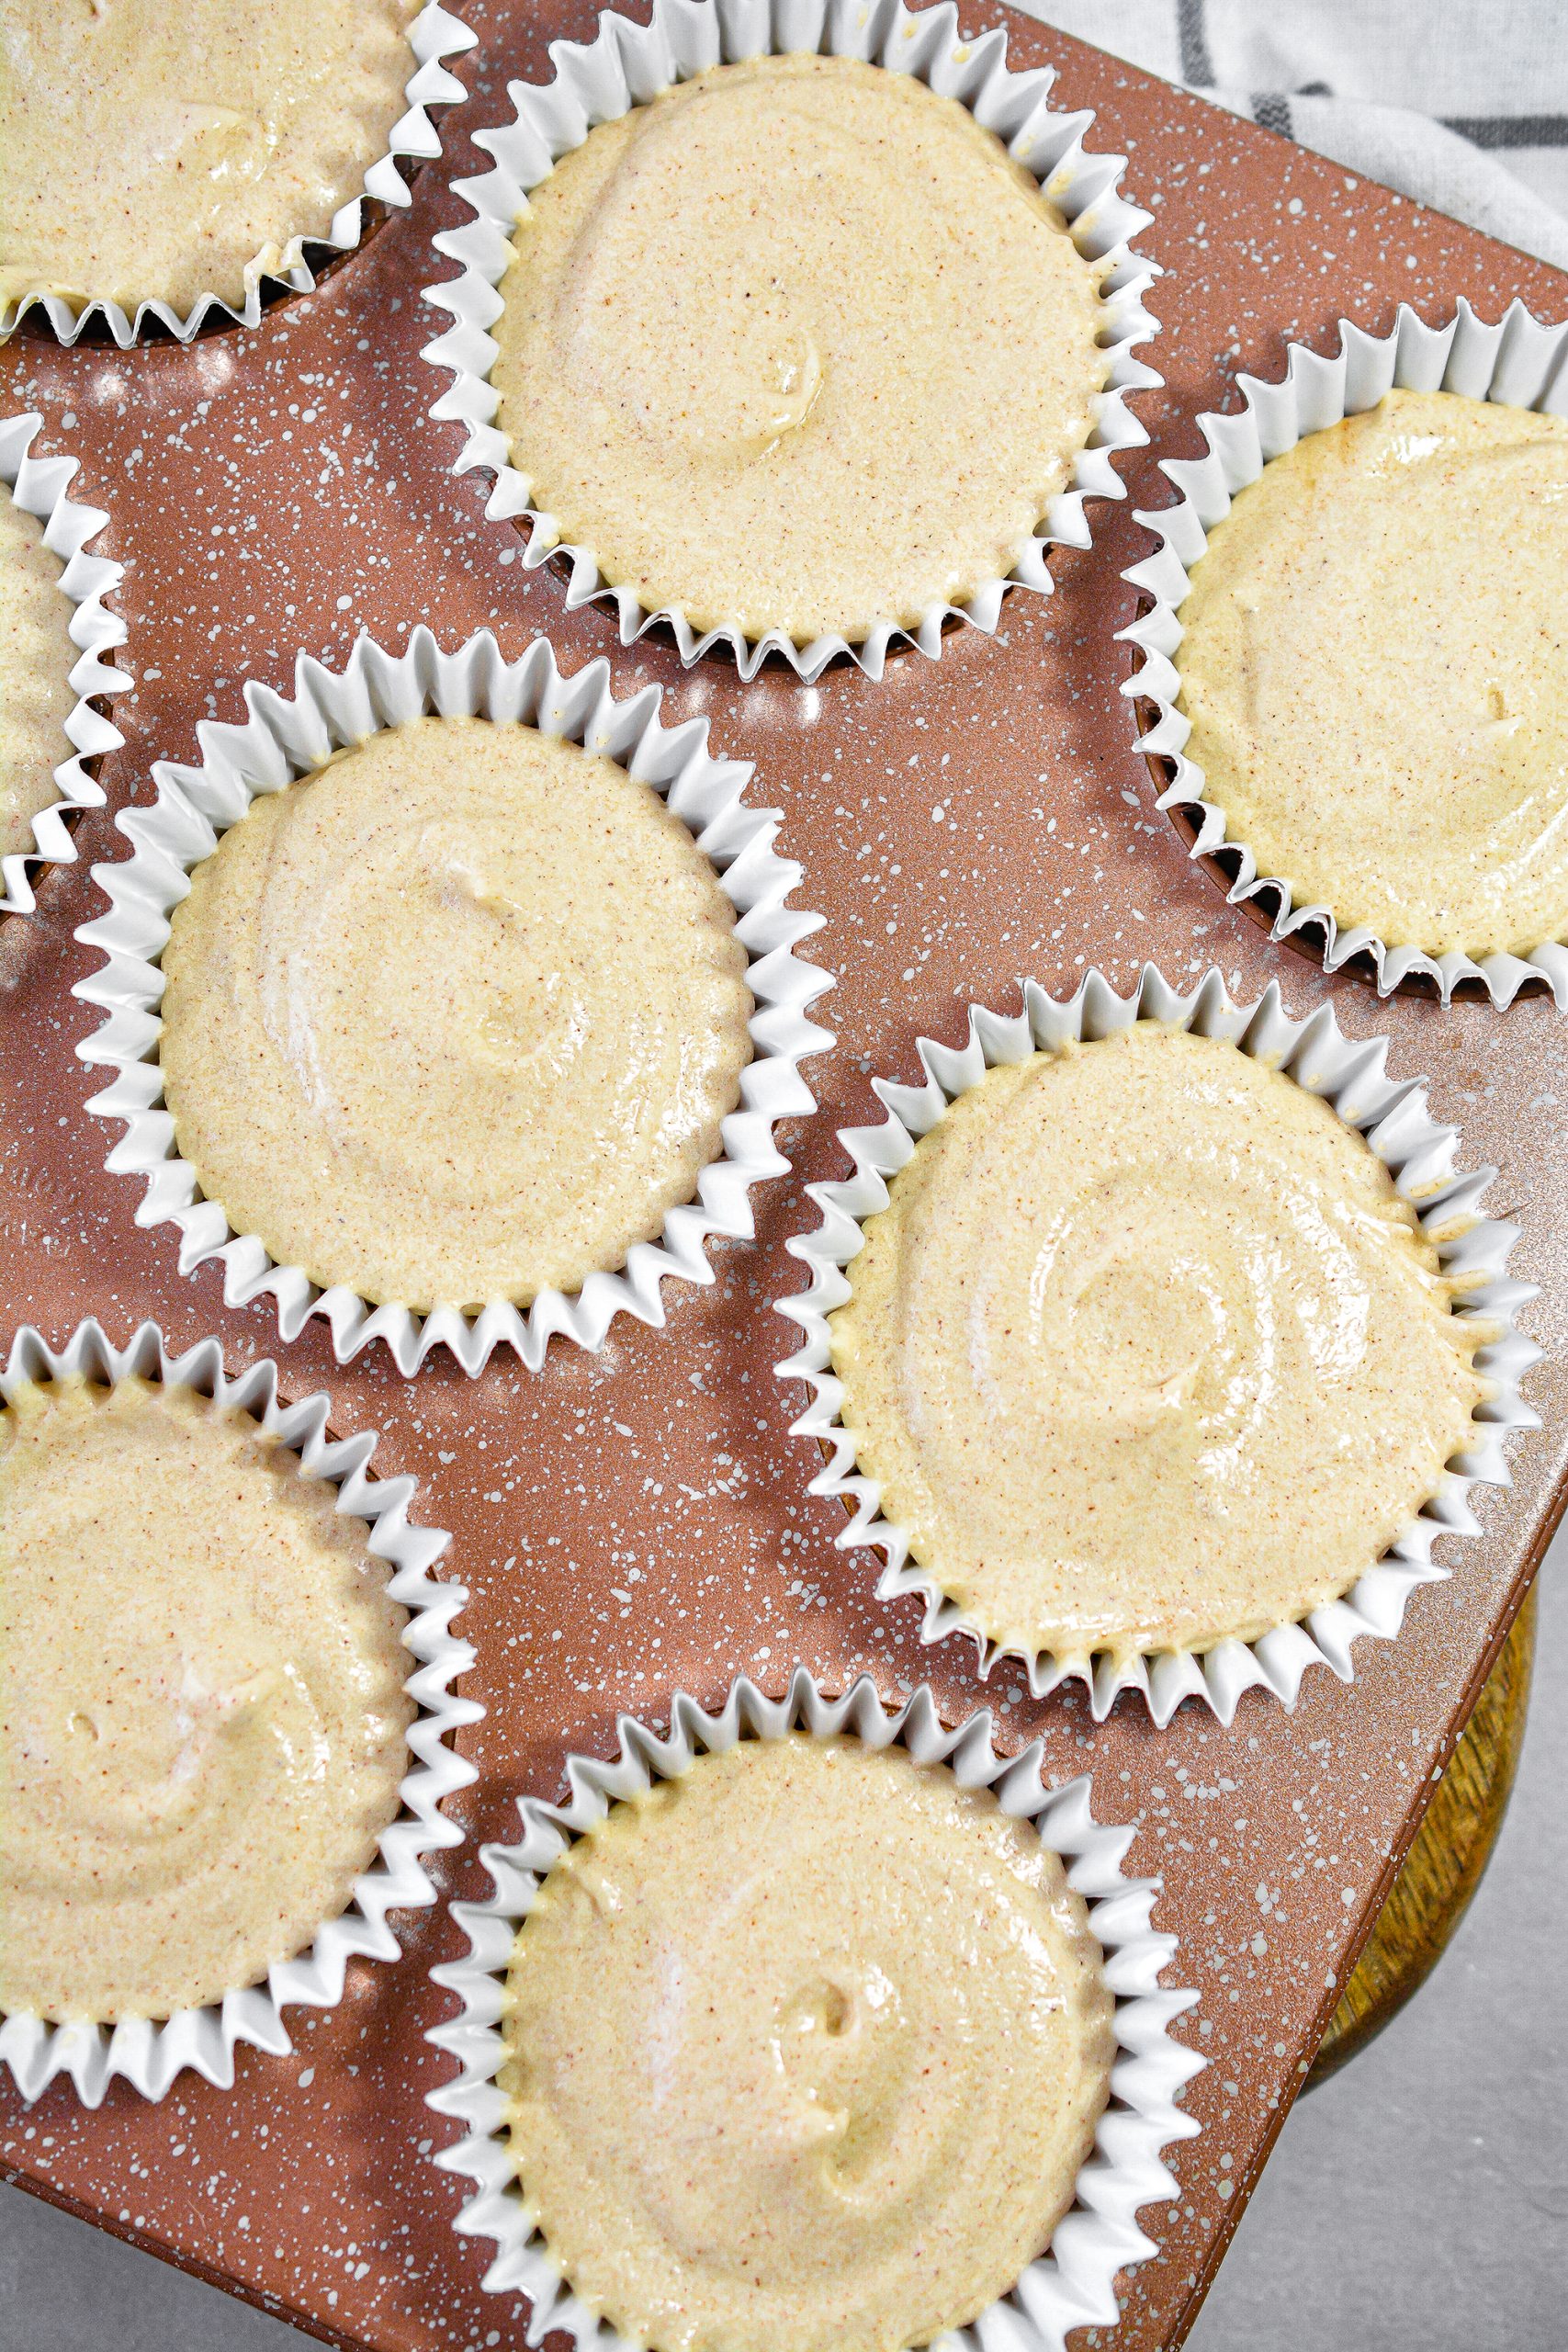 Fill 12 sections of a muffin tin with cupcake liners, and fill each liner ⅔ of the way full of the batter.